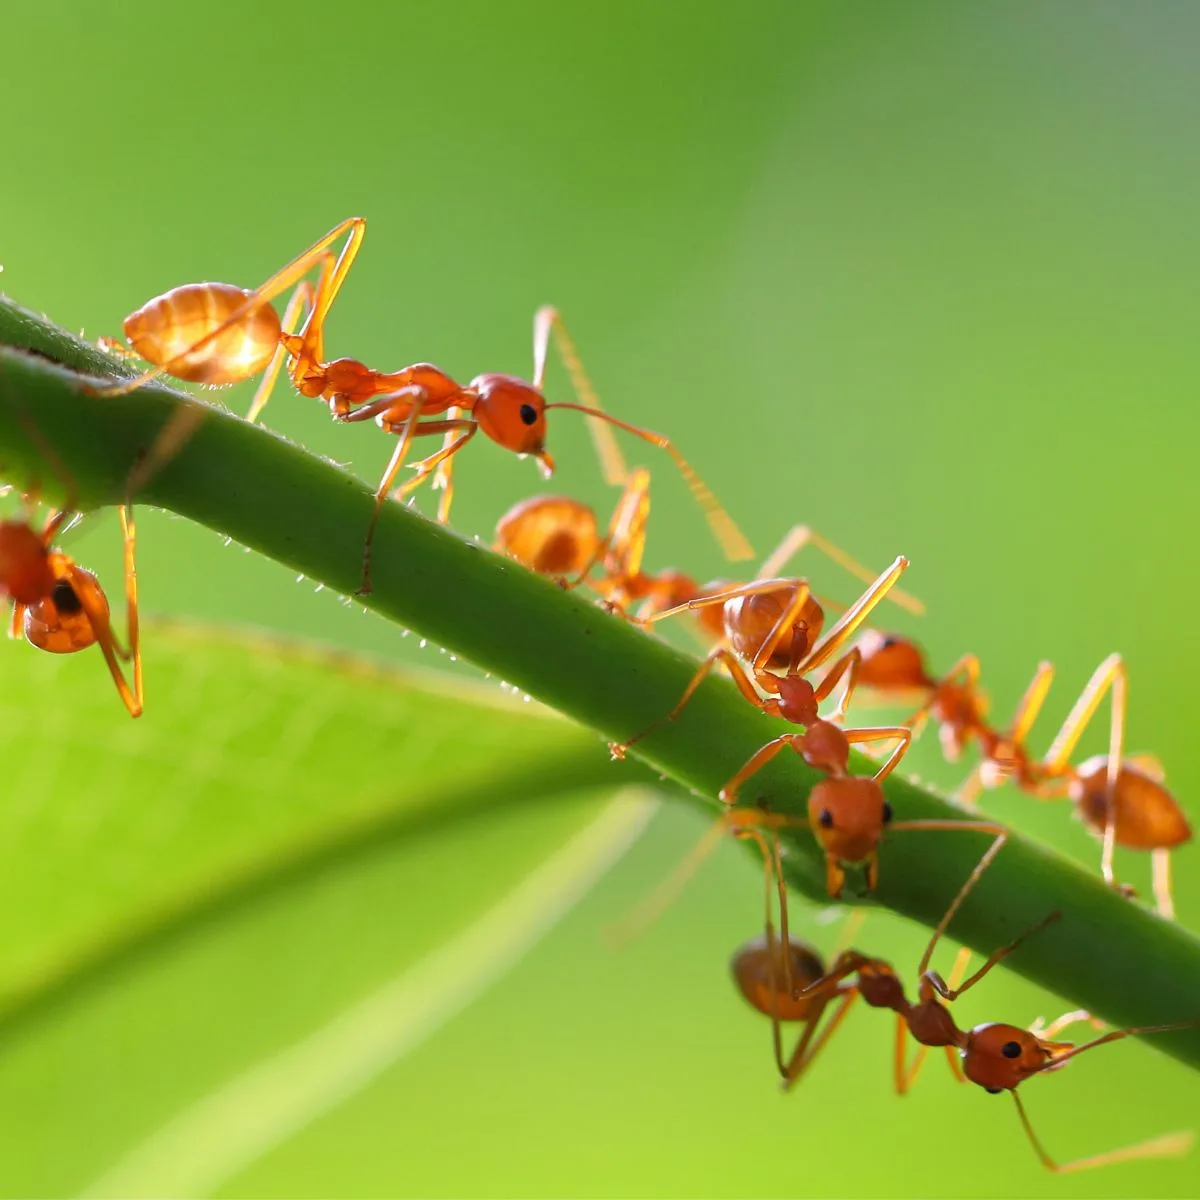 Fire ants on a plant stem.